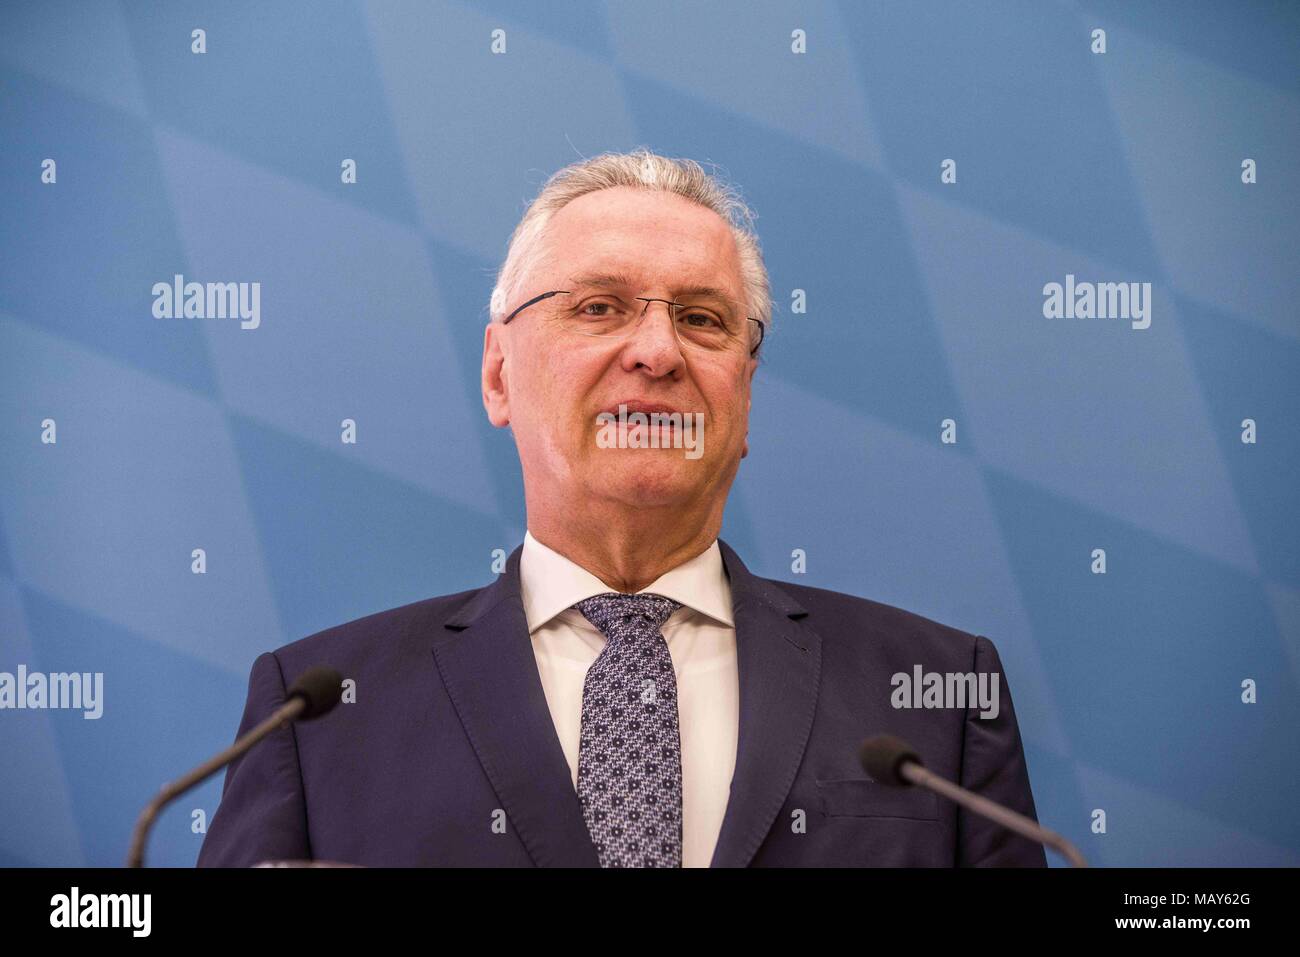 Munich, Bavaria, Germany. 5th Apr, 2018. Joachim Herrmann, Interior Minister of Bavaria. The 2017-2018 edition of the Bavarian Verfassungsschutzbericht (Office for the Protection of the Constitution, Secret Service) report was released detailing threats to the state of Bavaria, including right- and left-extremism, Islamists, as well as Cyber Warfare and Espionage. The report introduced by Bavarian Innenminister Joachim Herrmann (CSU) and Dr. Burkhard KÃƒÂ¶rner, as well as .In recent years, Bavaria has seen a sharp rise in what is known as PMK-Rechts (politically motivated crimes- right wing Stock Photo